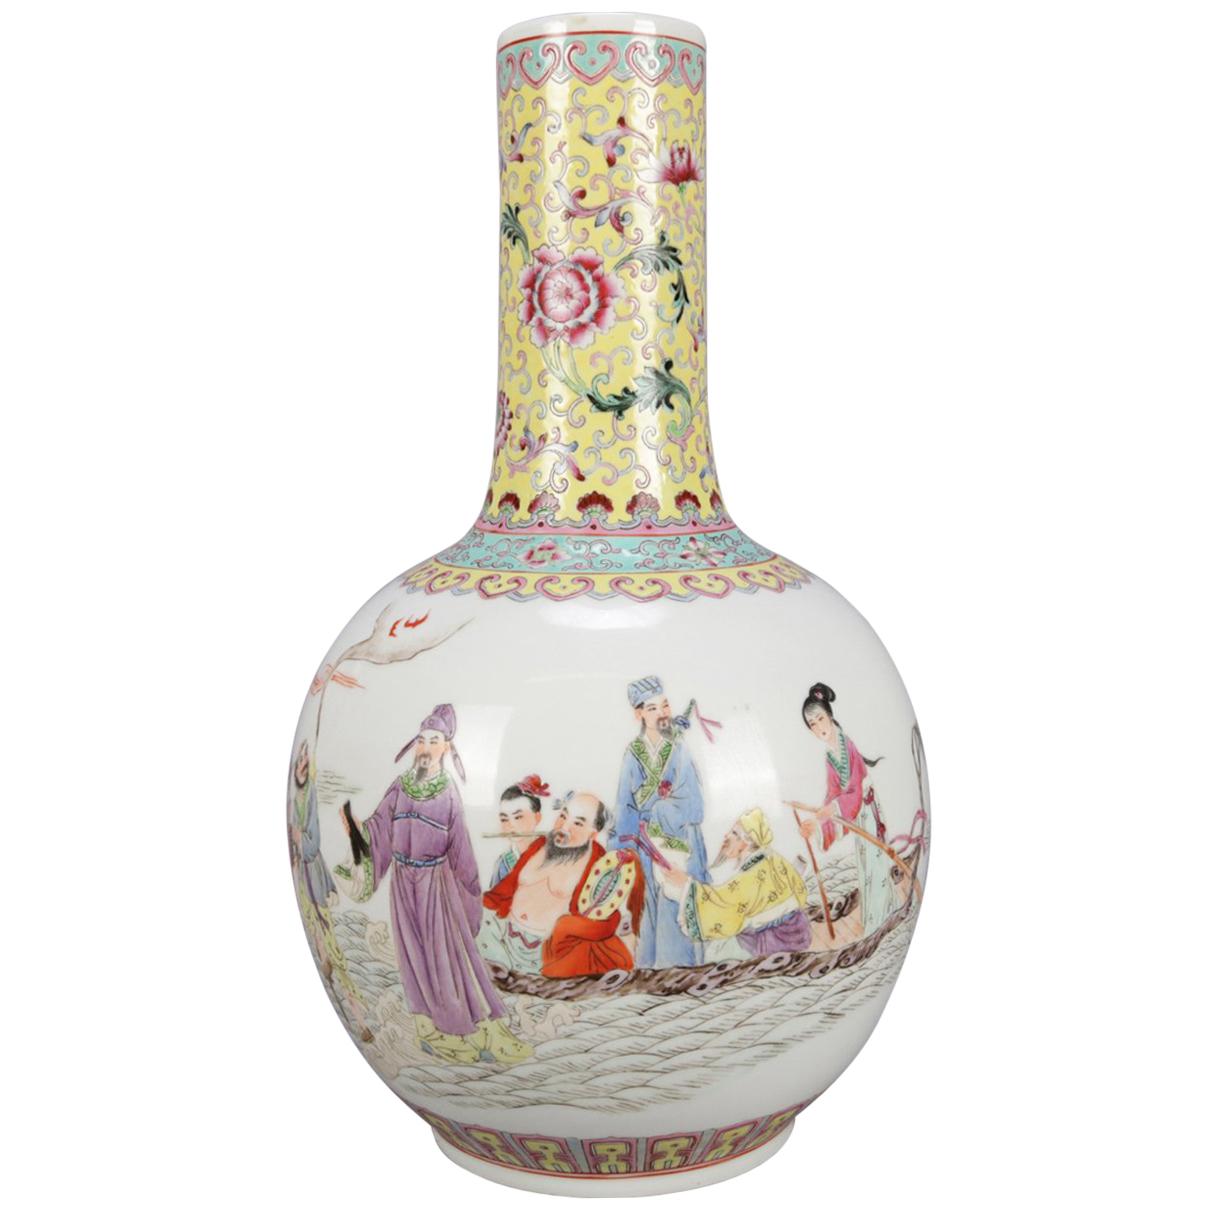 Chinese Enameled Porcelain Pictorial Vase, Chop Mark Signed and Verbiage